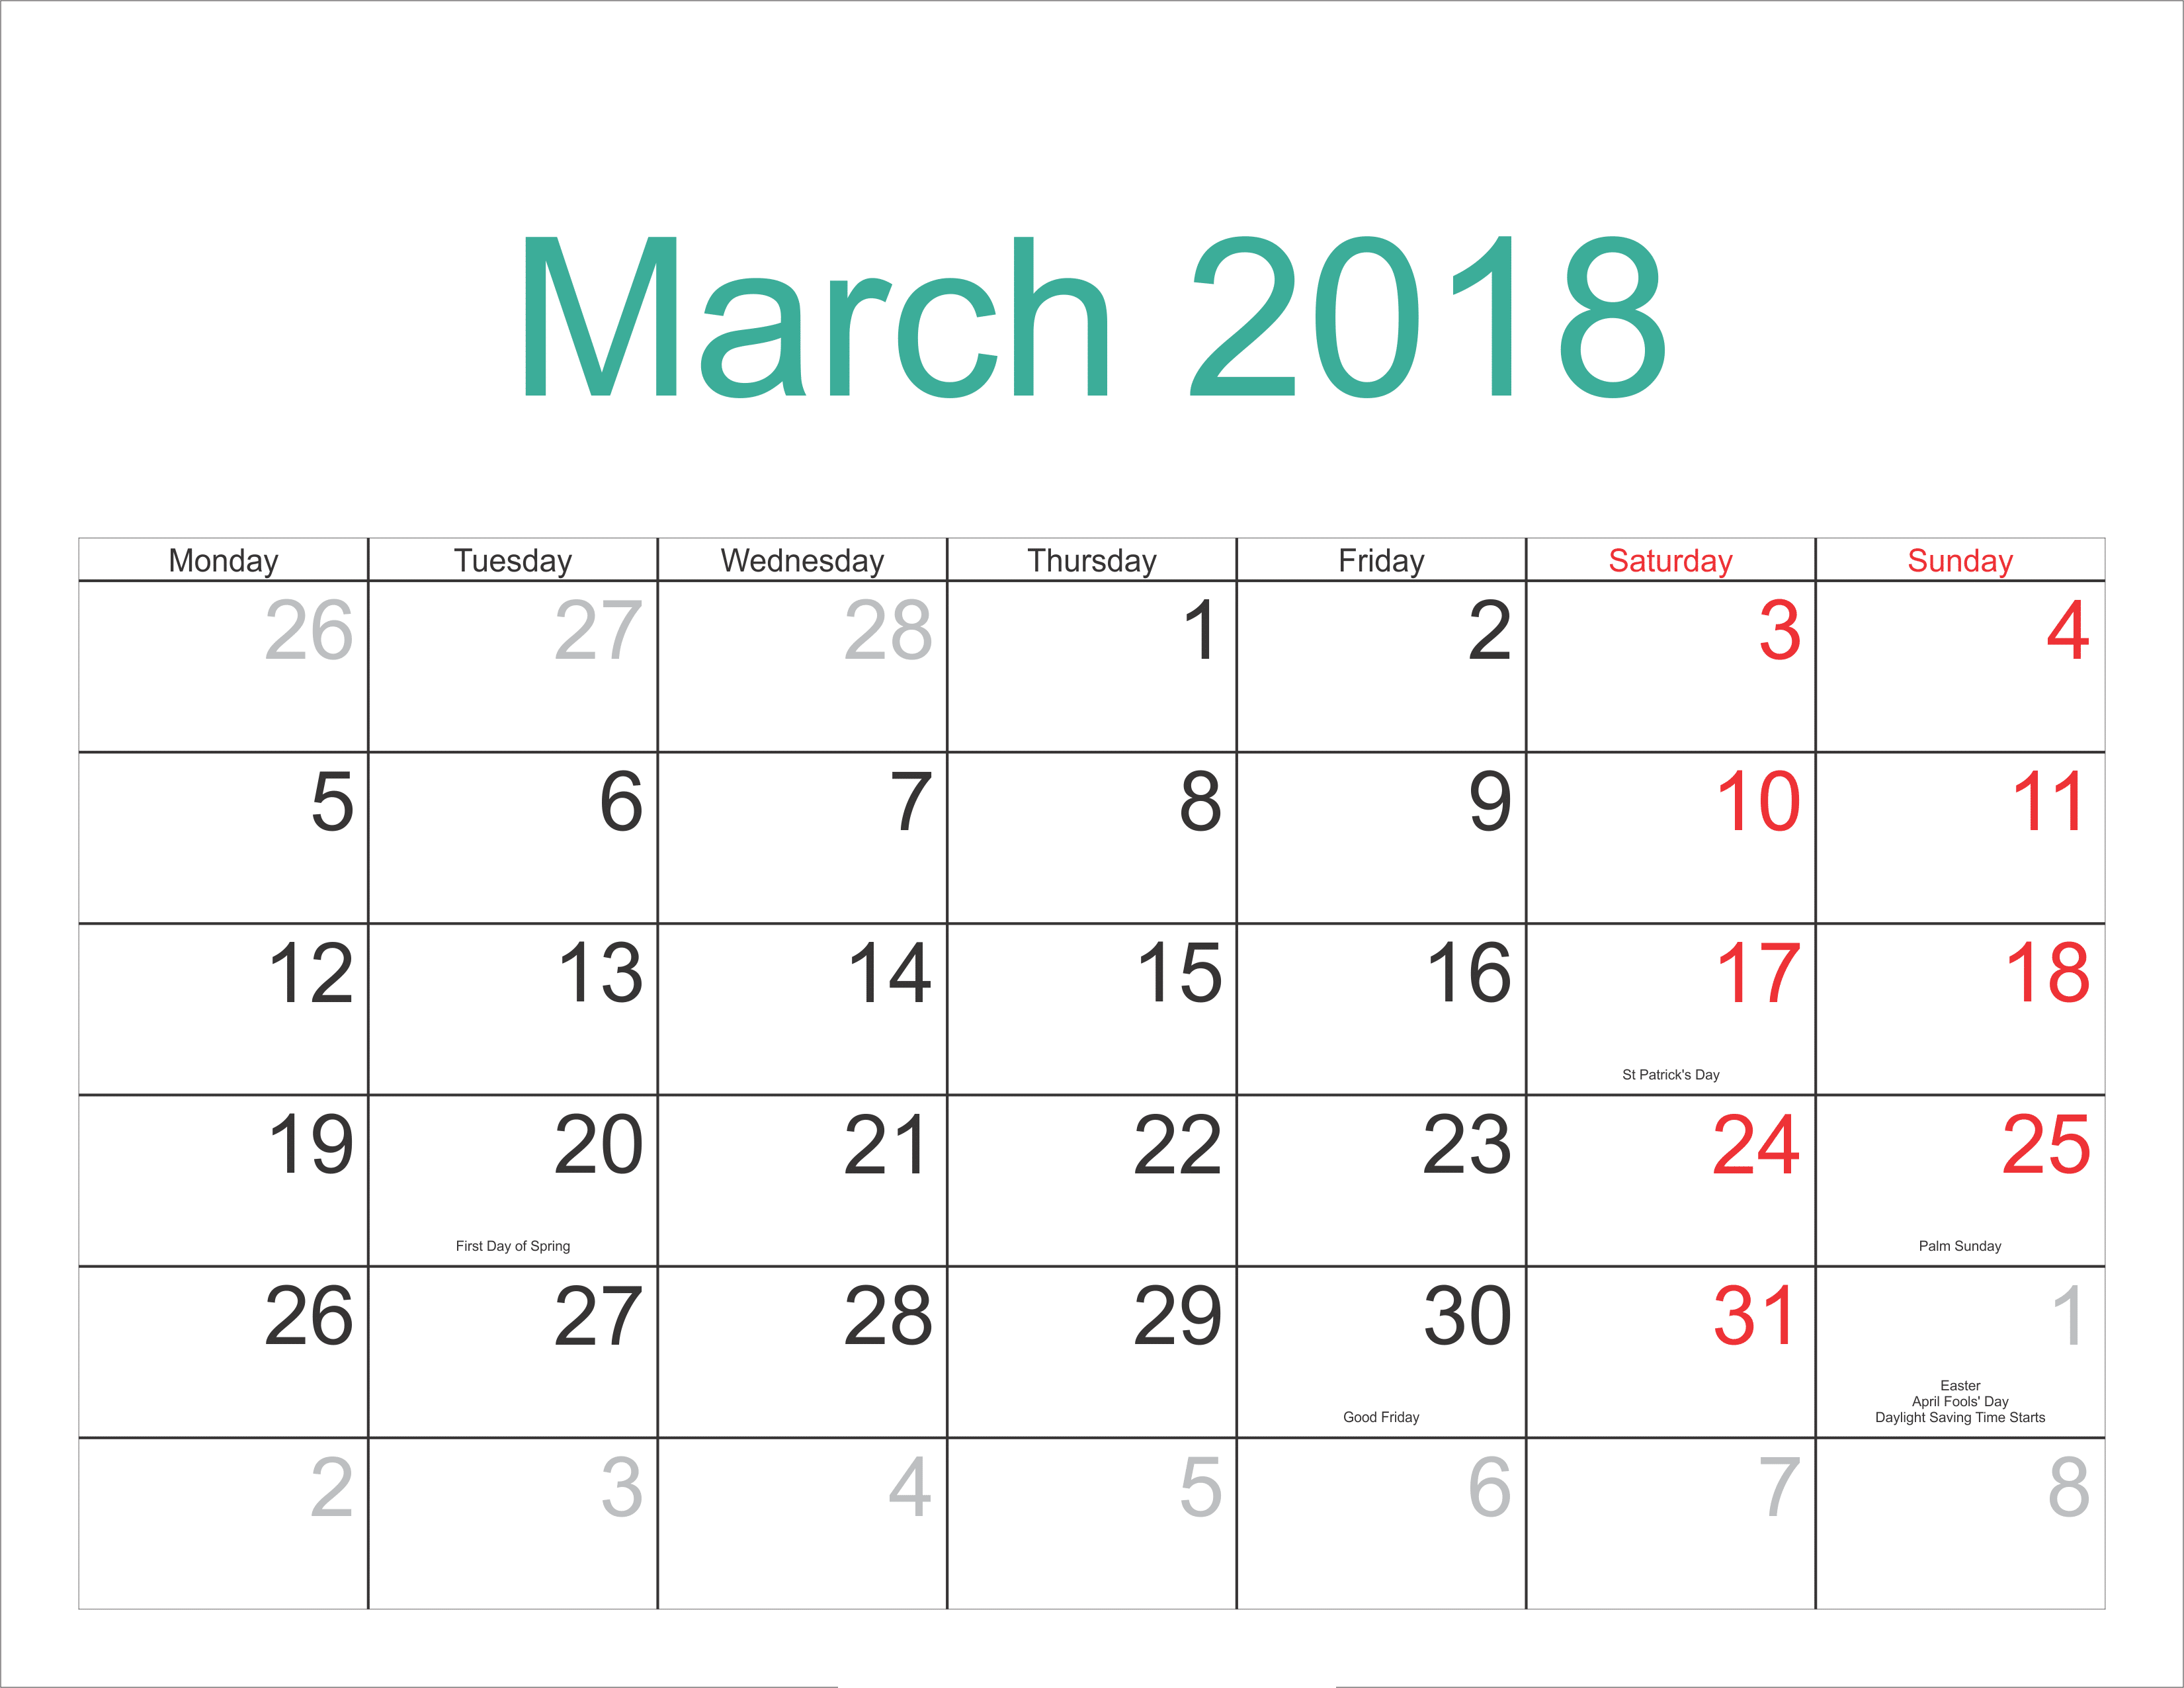 Moon Phases March 2018 Calendar